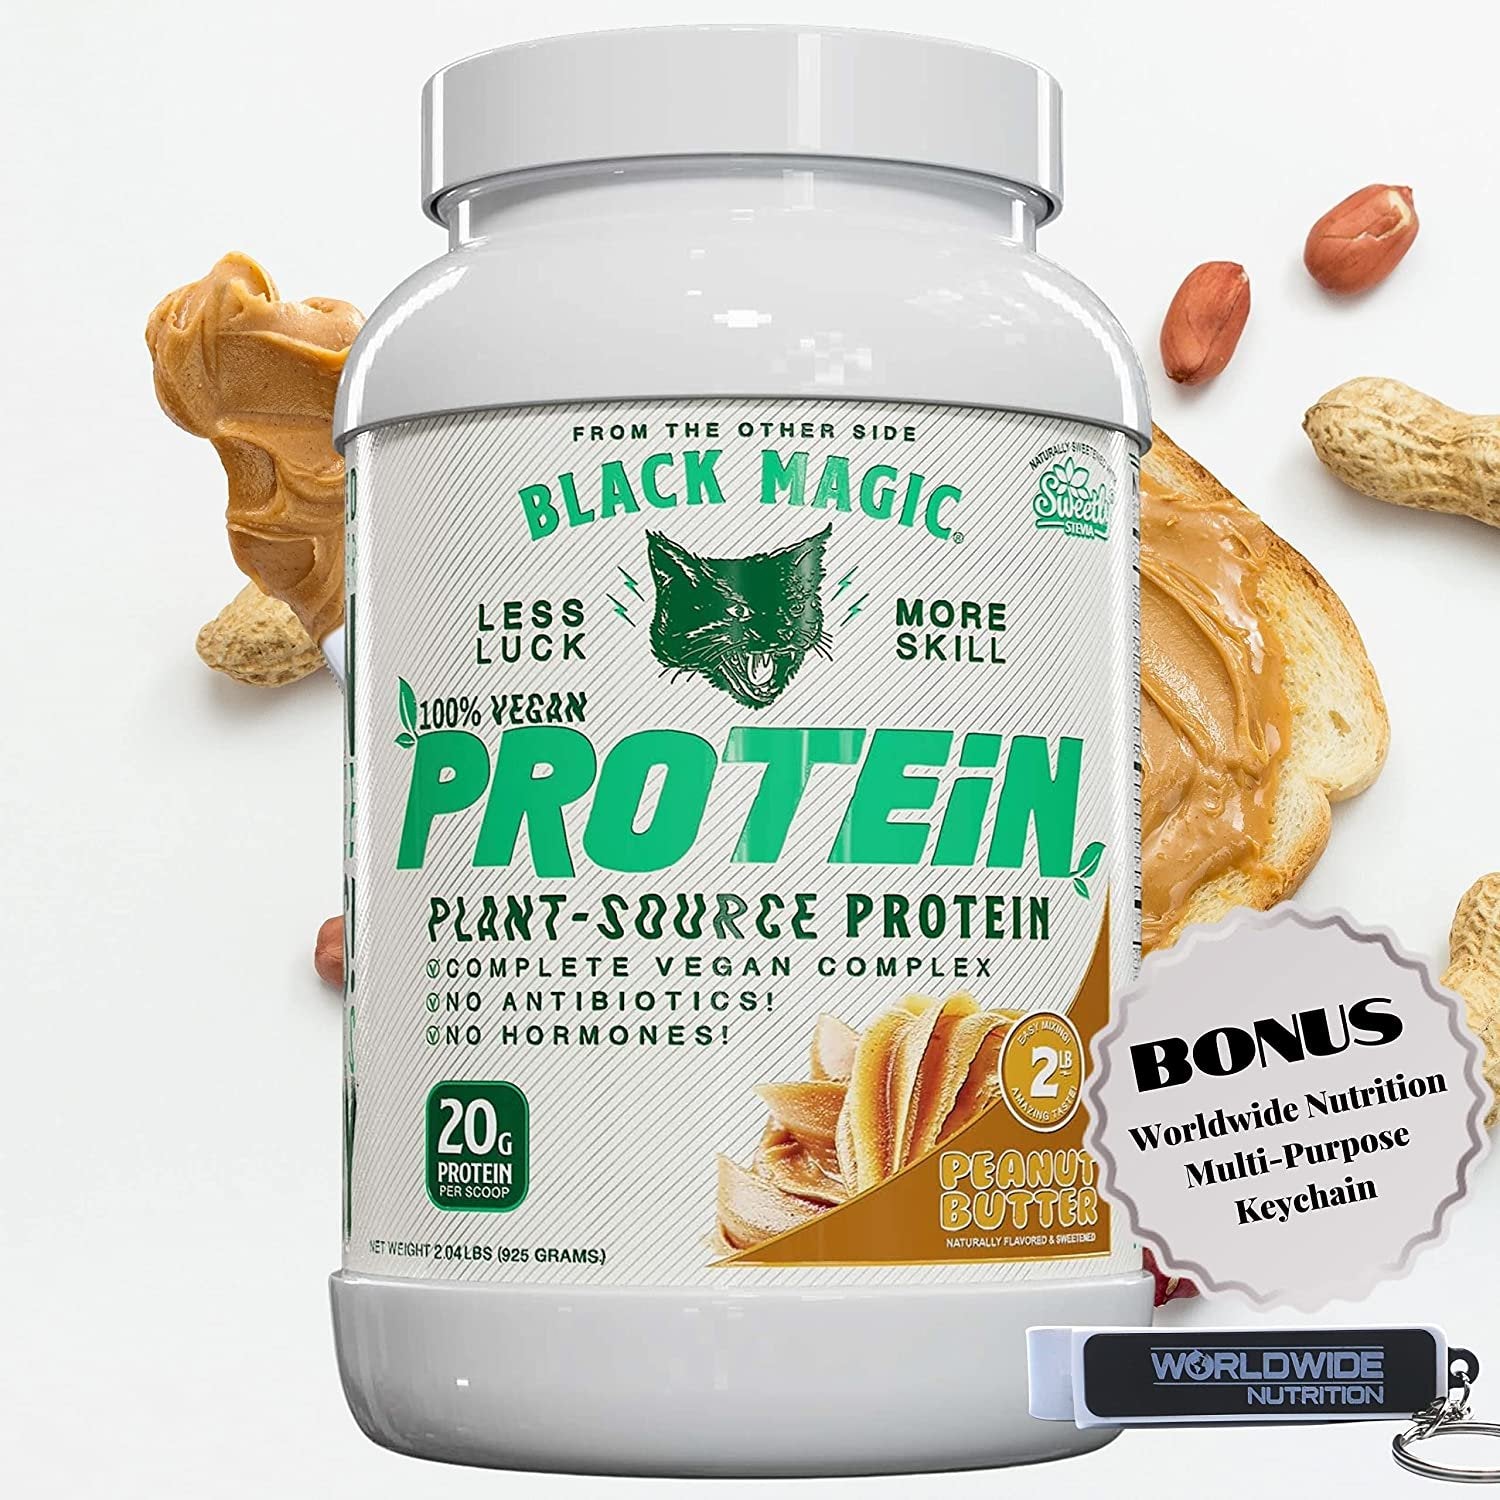 Peanut Butter Black Magic Multi-Source Protein - Whey, Egg, and Casein Complex with Enzymes & MCT Powder - Pre Workout and Post Workout - 24g Protein - 2 LB with Bonus Key Chain